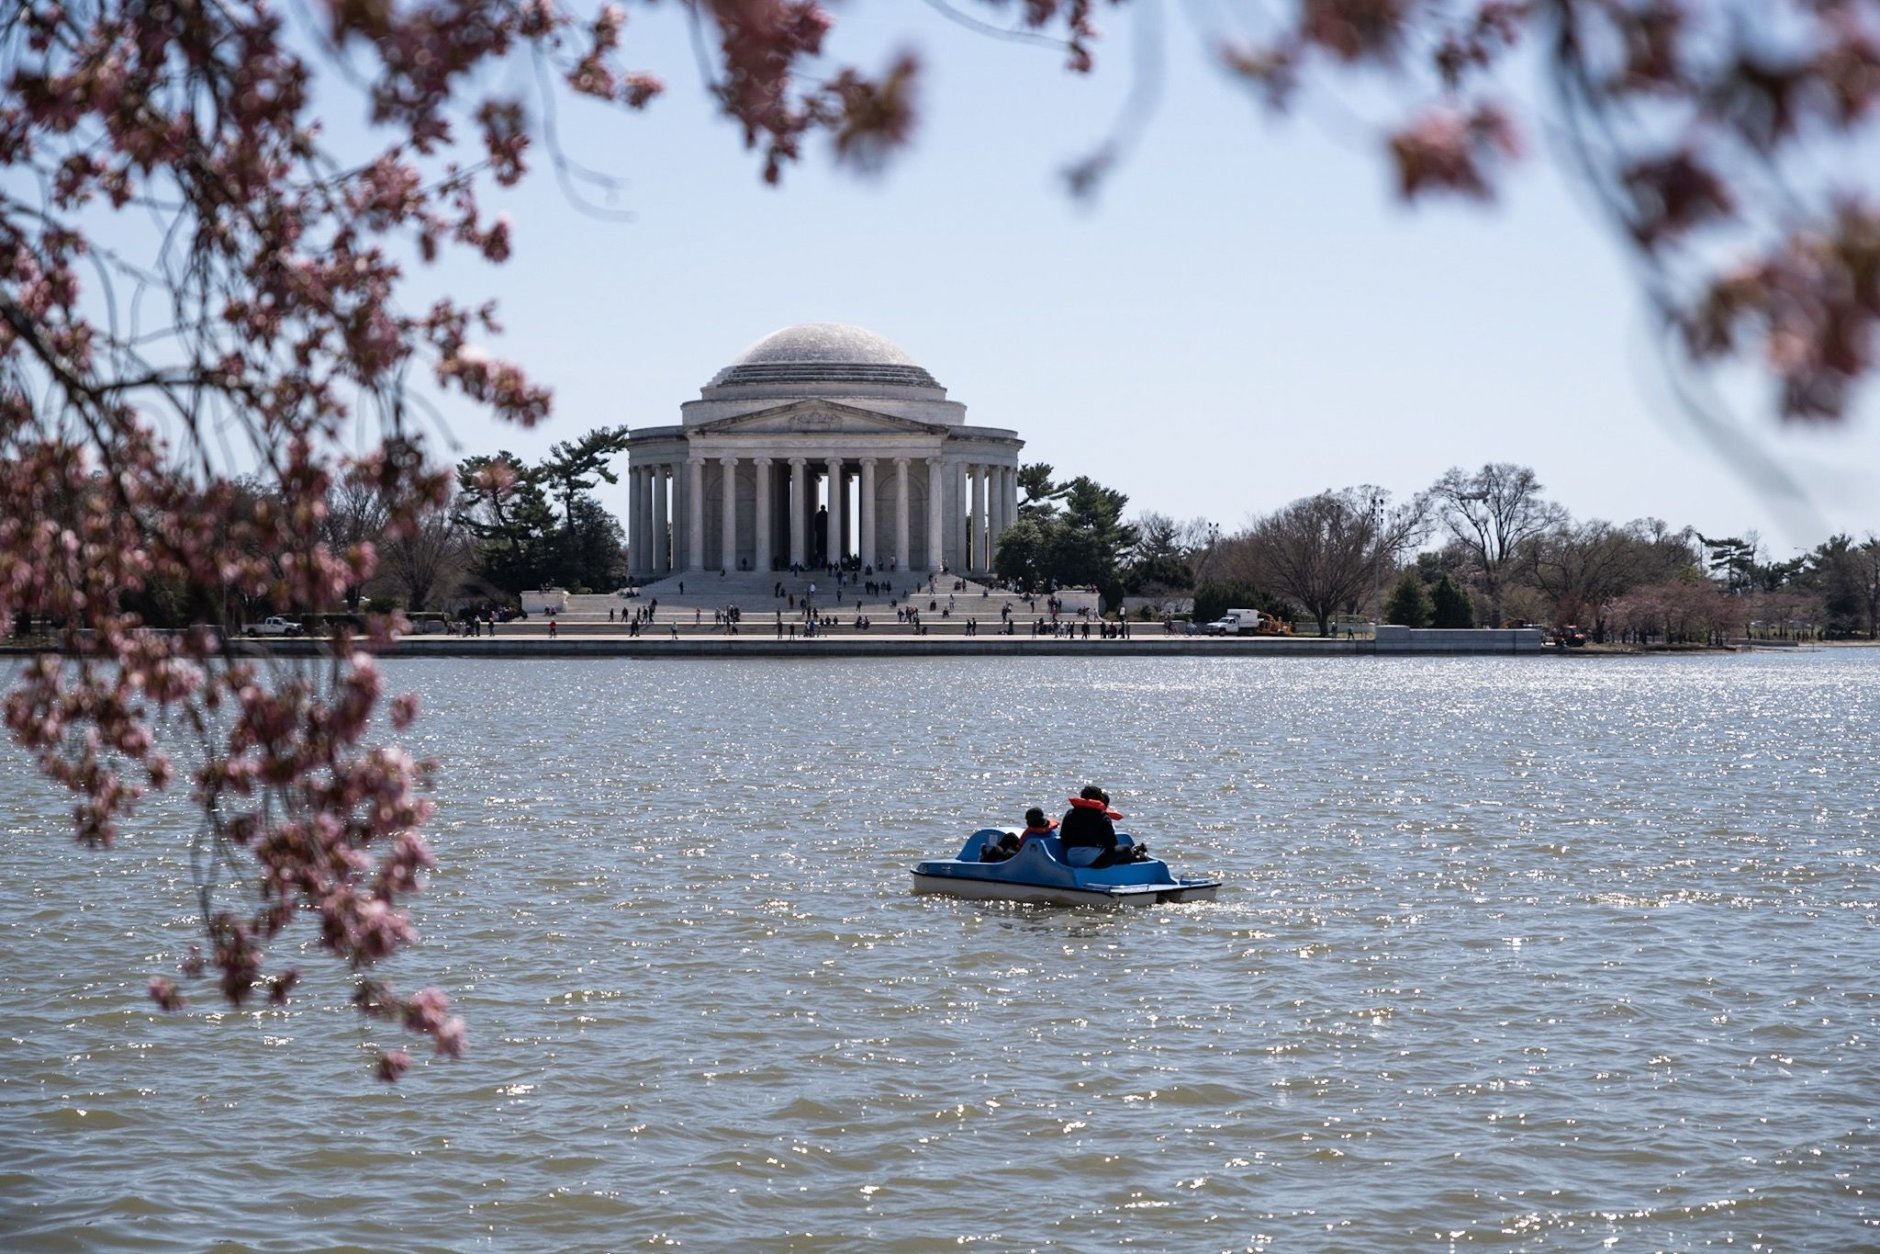 Paddle boats are a popular tourist attraction on the Tidal Basin. Even though crowds were light on March 28 — the middle of the work week — early arrivals to the Cherry Blossom Festival were enjoying a quite morning on the water. (WTOP/Alejandro Alvarez)